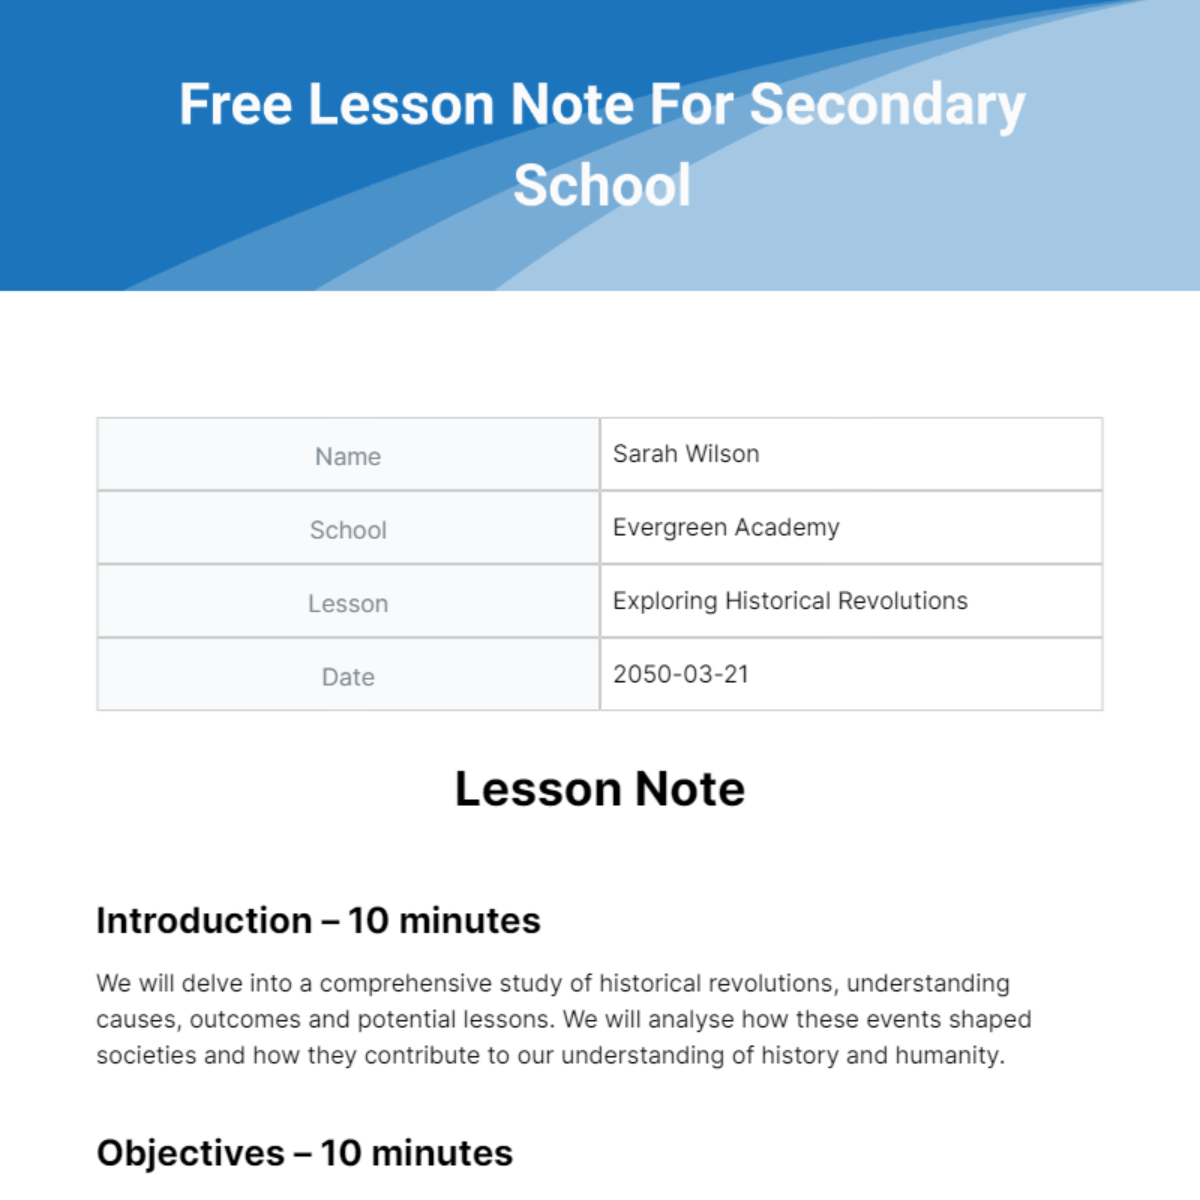 Free Lesson Note For Secondary School Template